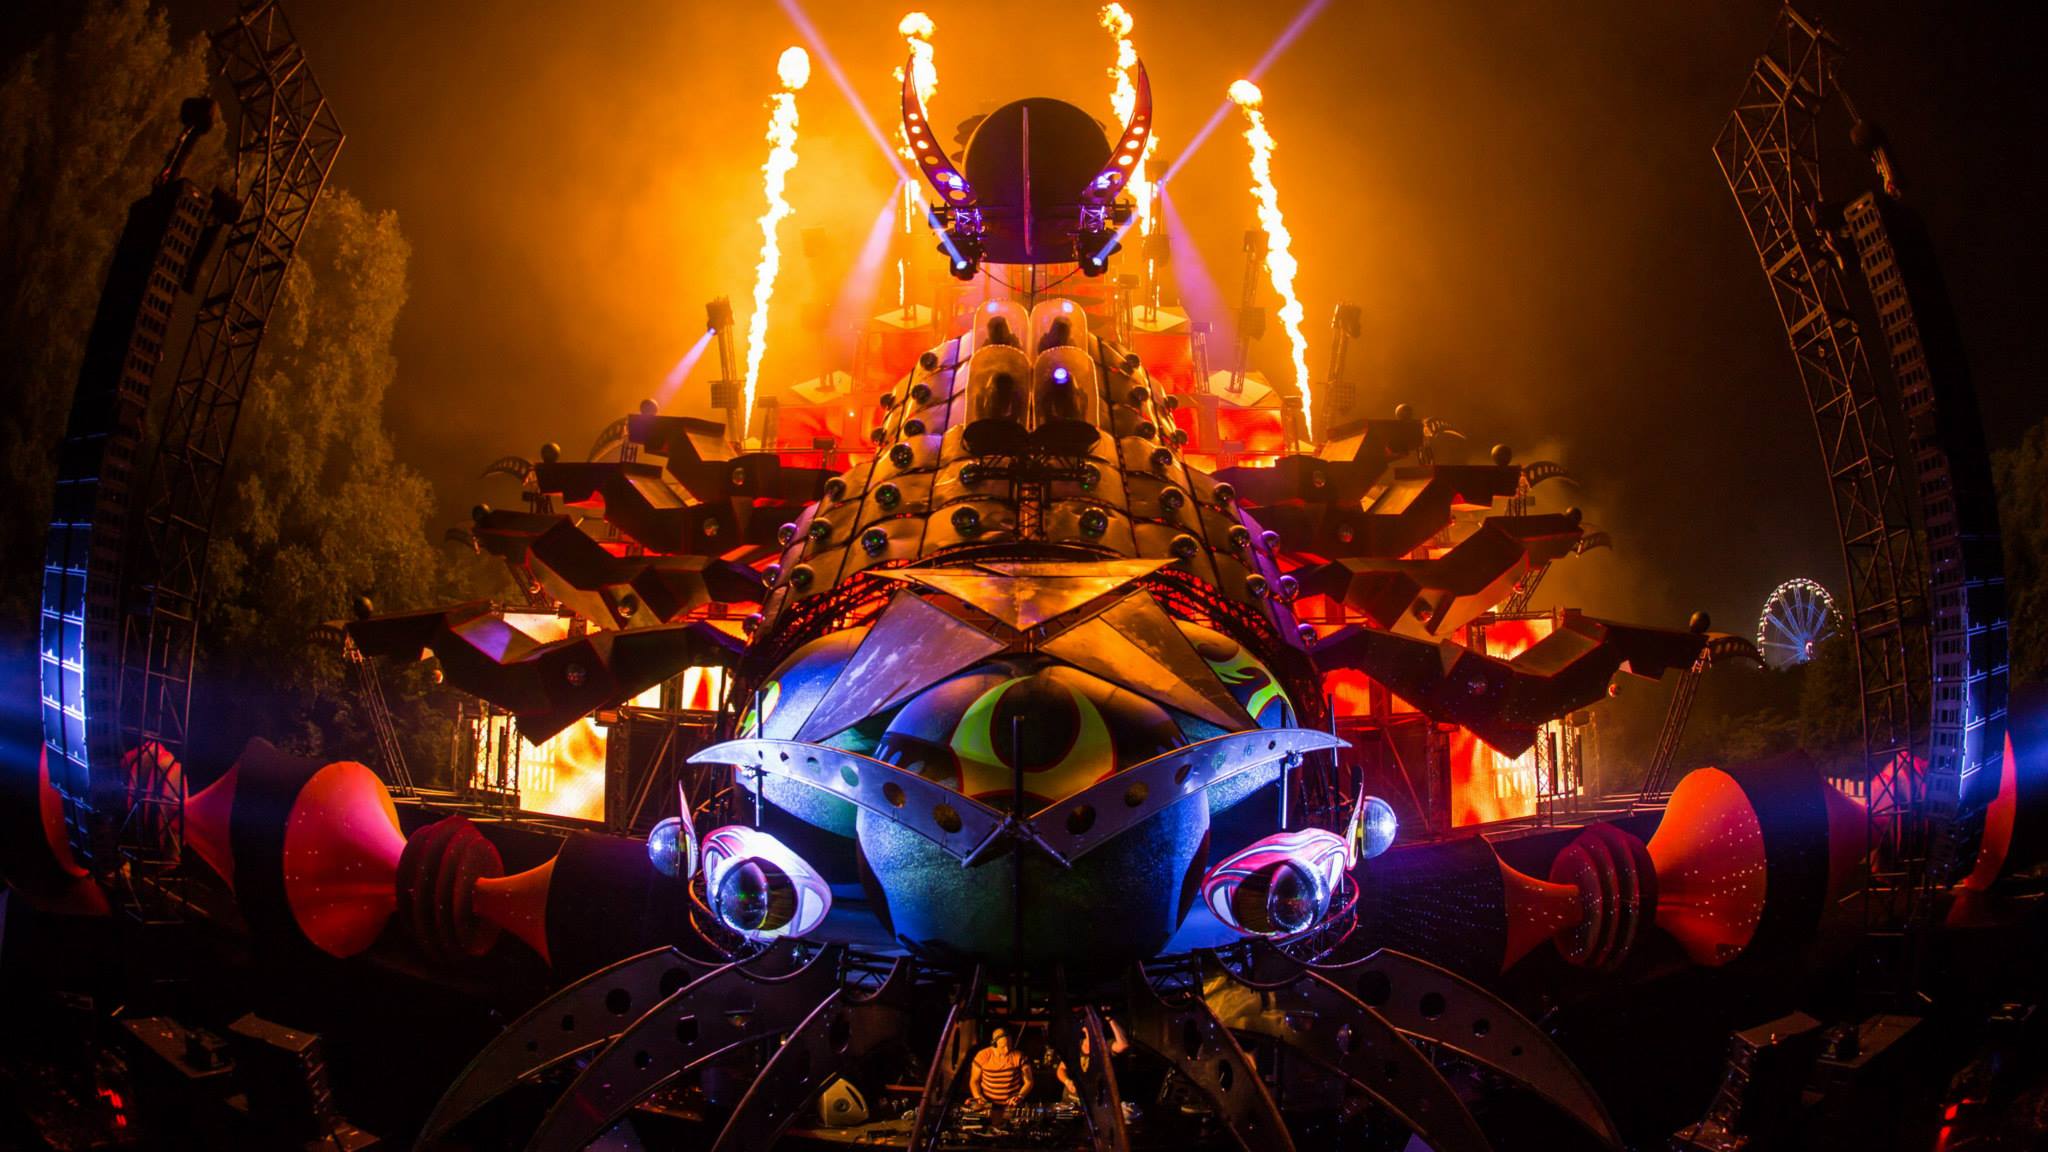 Eye candy: photo of beautiful EDM festival stage designs